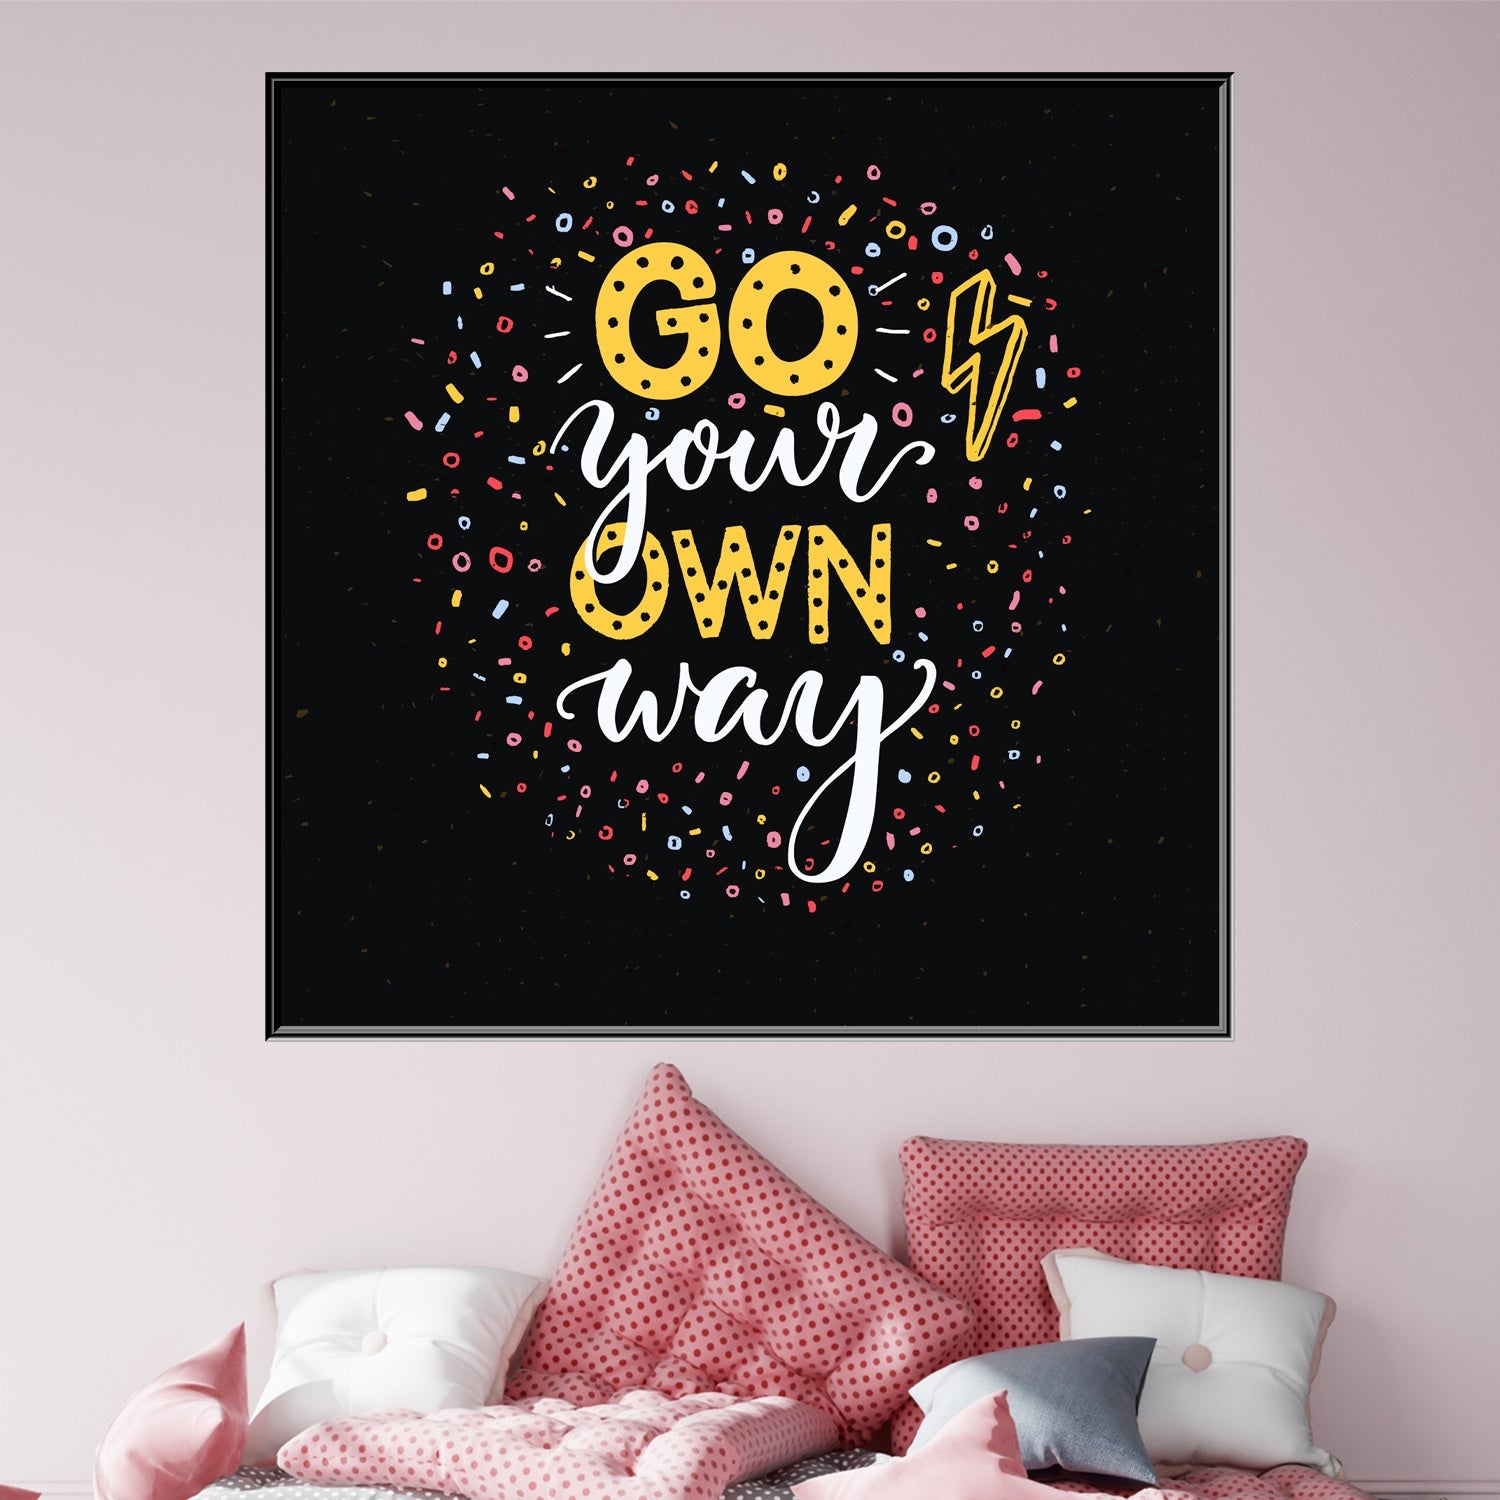 https://cdn.shopify.com/s/files/1/0387/9986/8044/products/GoYourOwnWayCanvasArtprintStretched-2.jpg